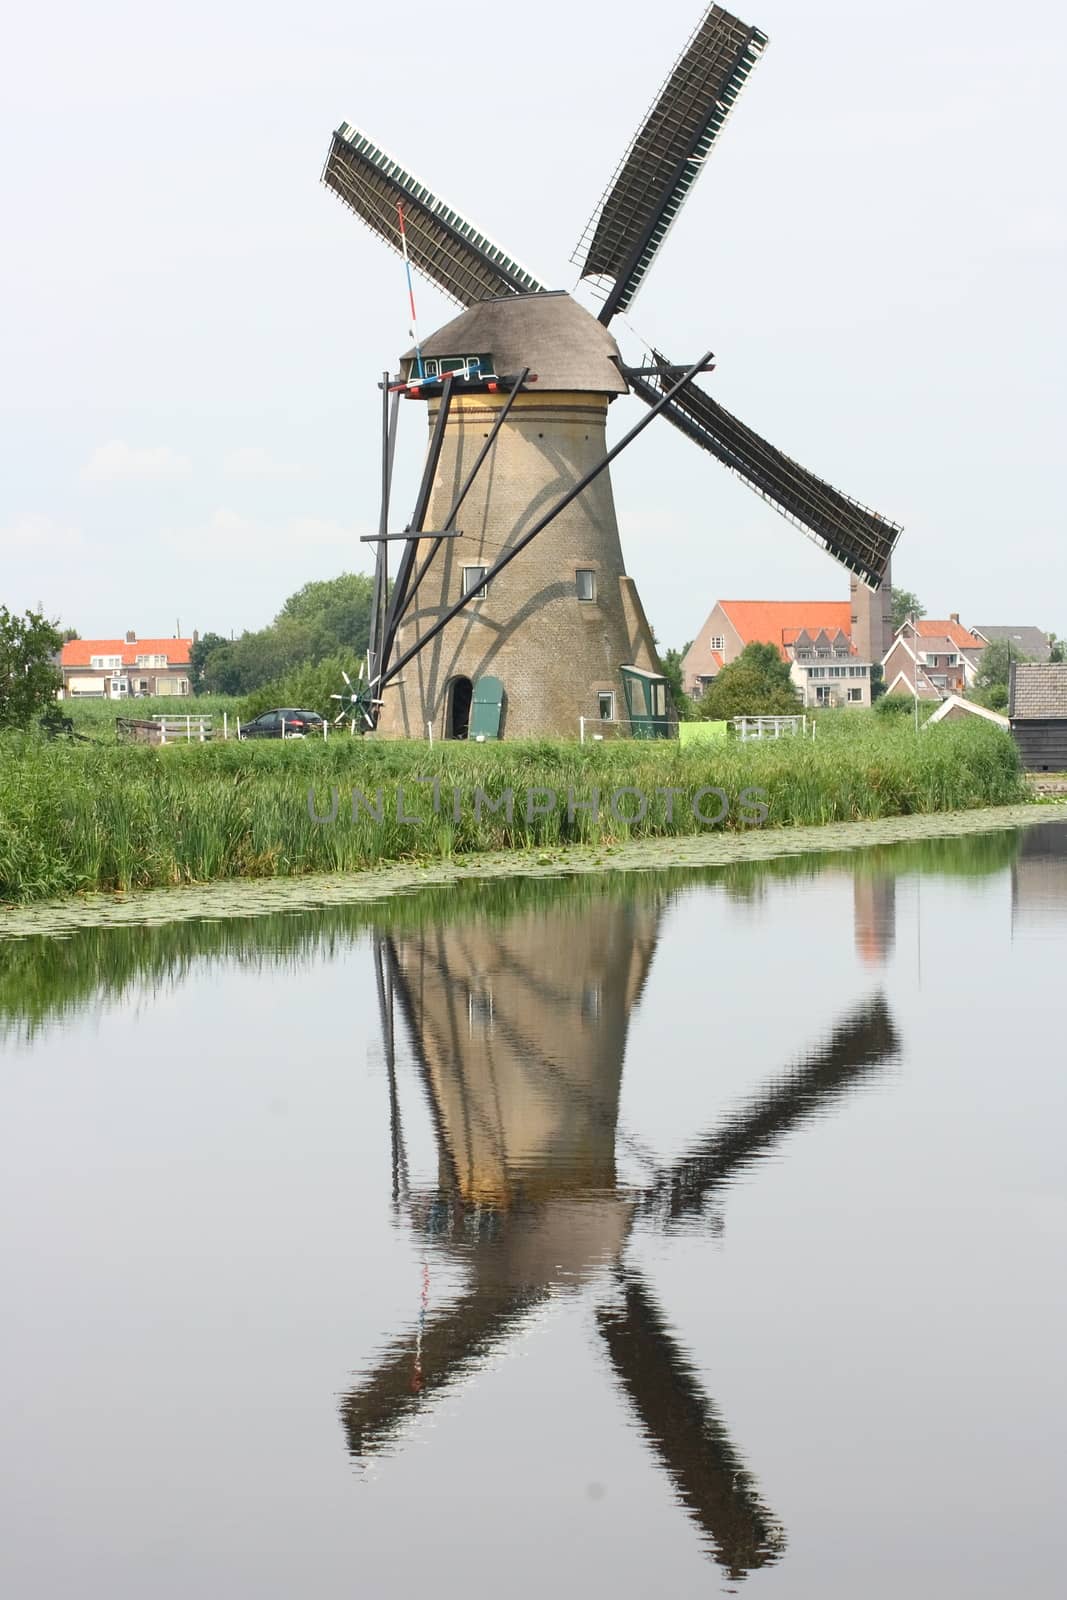 A beautiful, old, historic windmill, with four wings